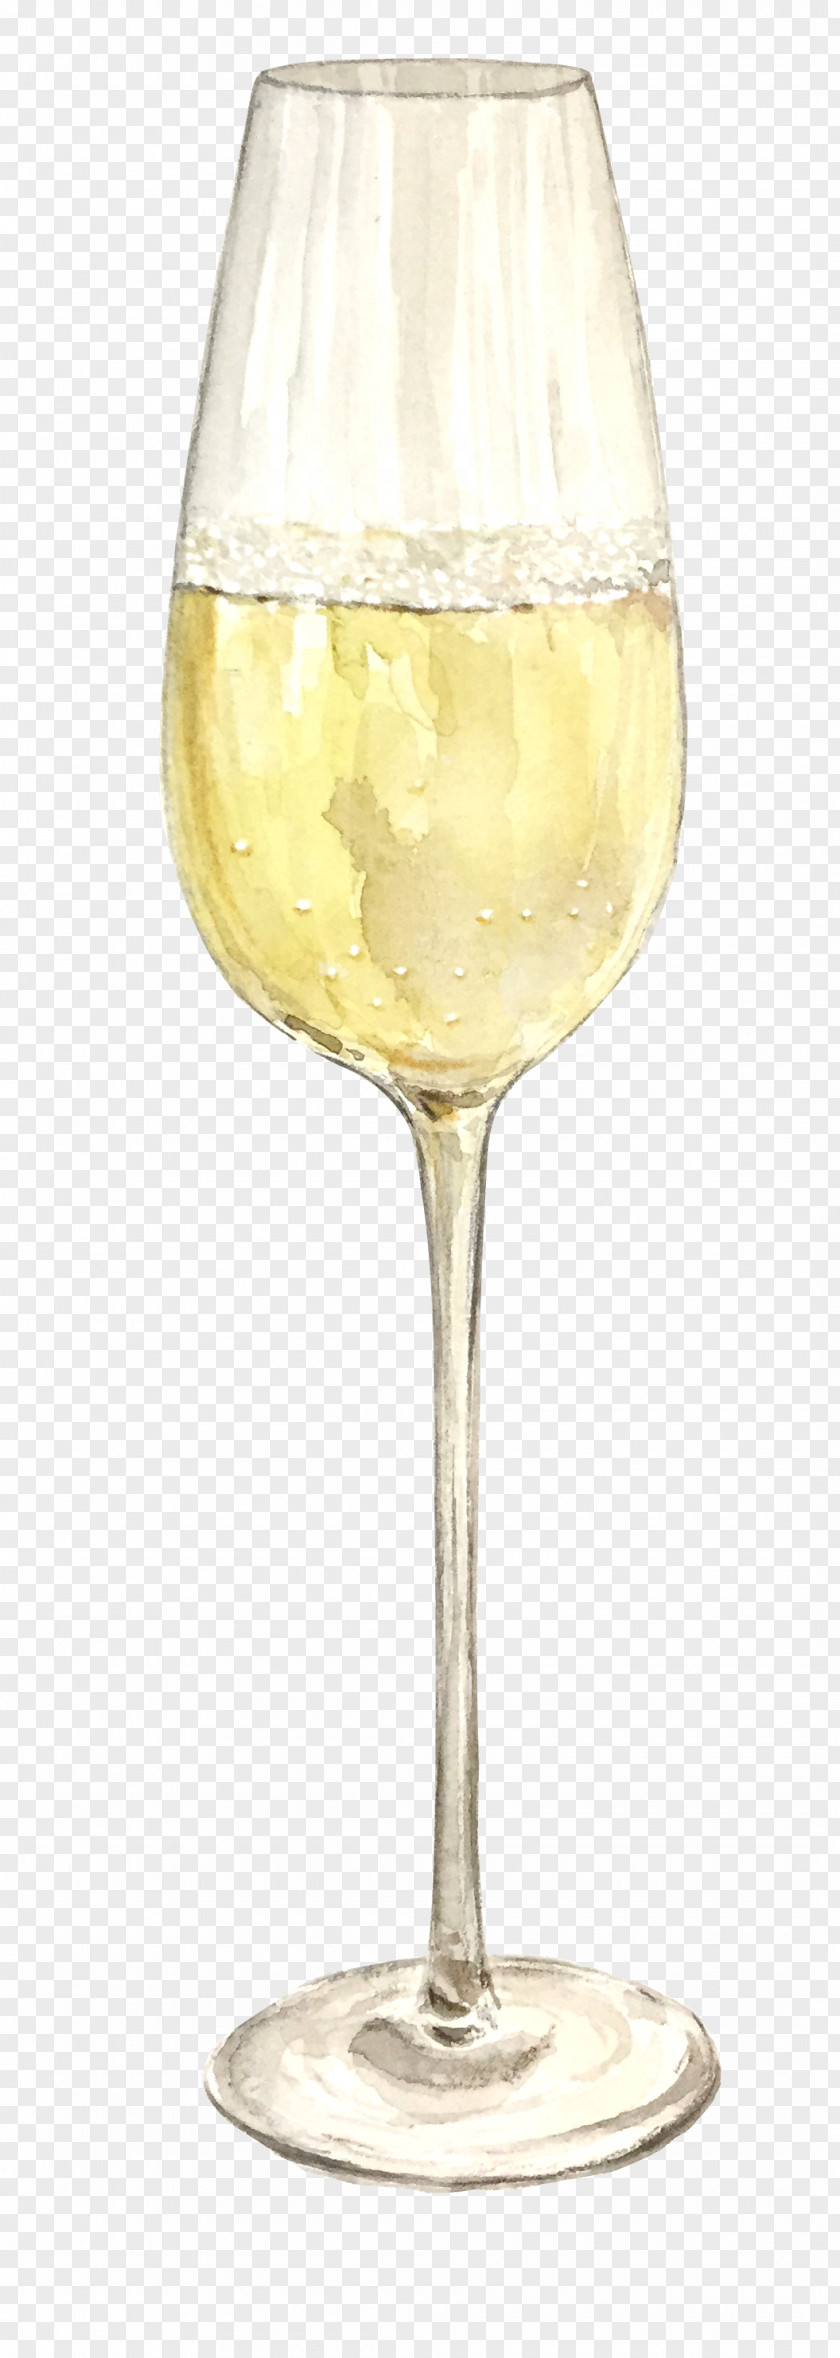 Wine Glass White Champagne Cocktail Spritzer PNG